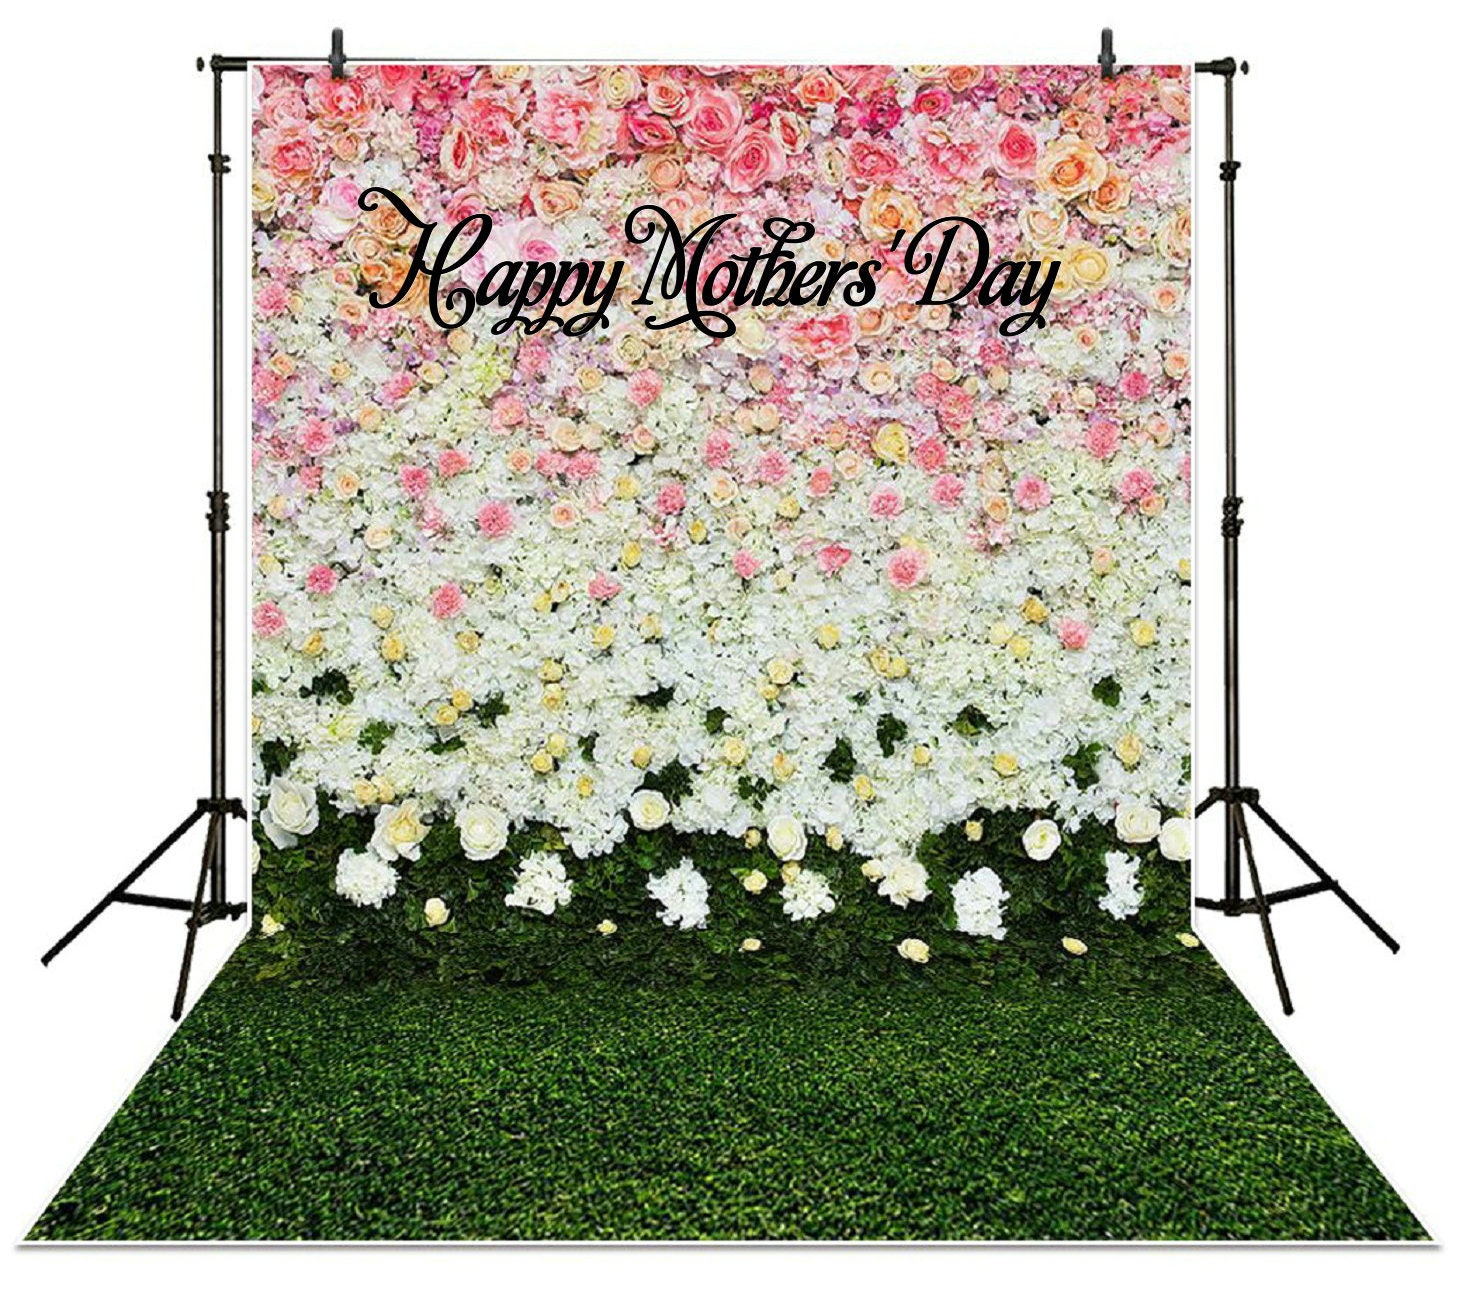 Flower Wall & Grass Backdrop Happy Mothers' Day Banner Love My Mom Mothers  Day Party Decoration Birthday Family Photography Background 